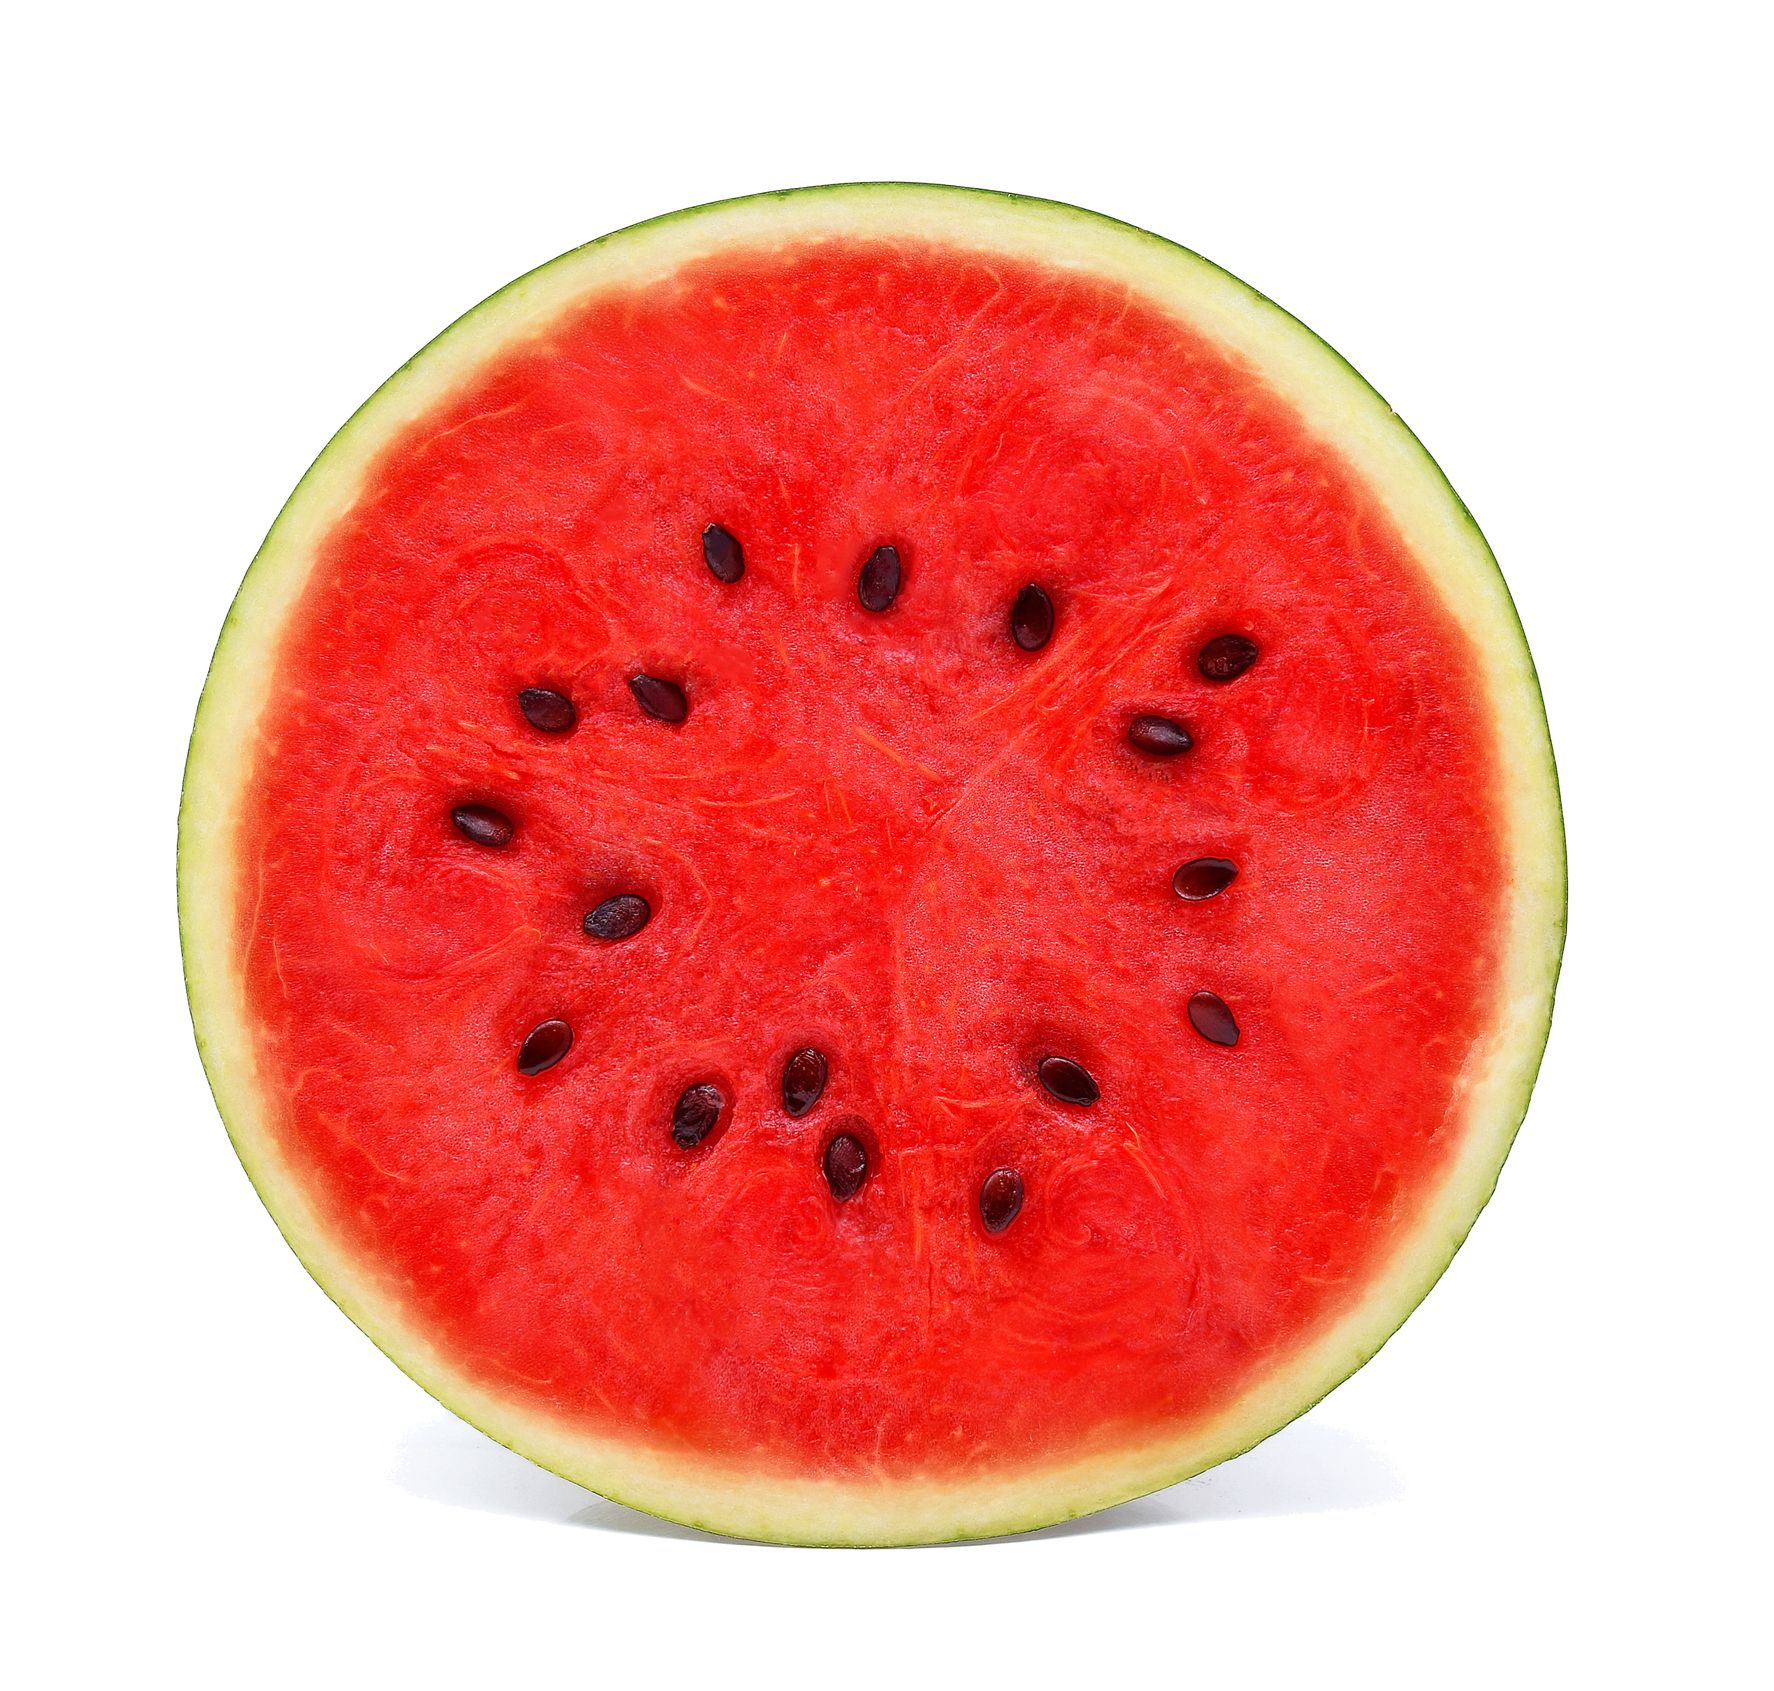 Watermelon, Melon, Fruit, Food, Plant, Citrullus, Superfood, Produce, Cucumber, gourd, and melon family, 